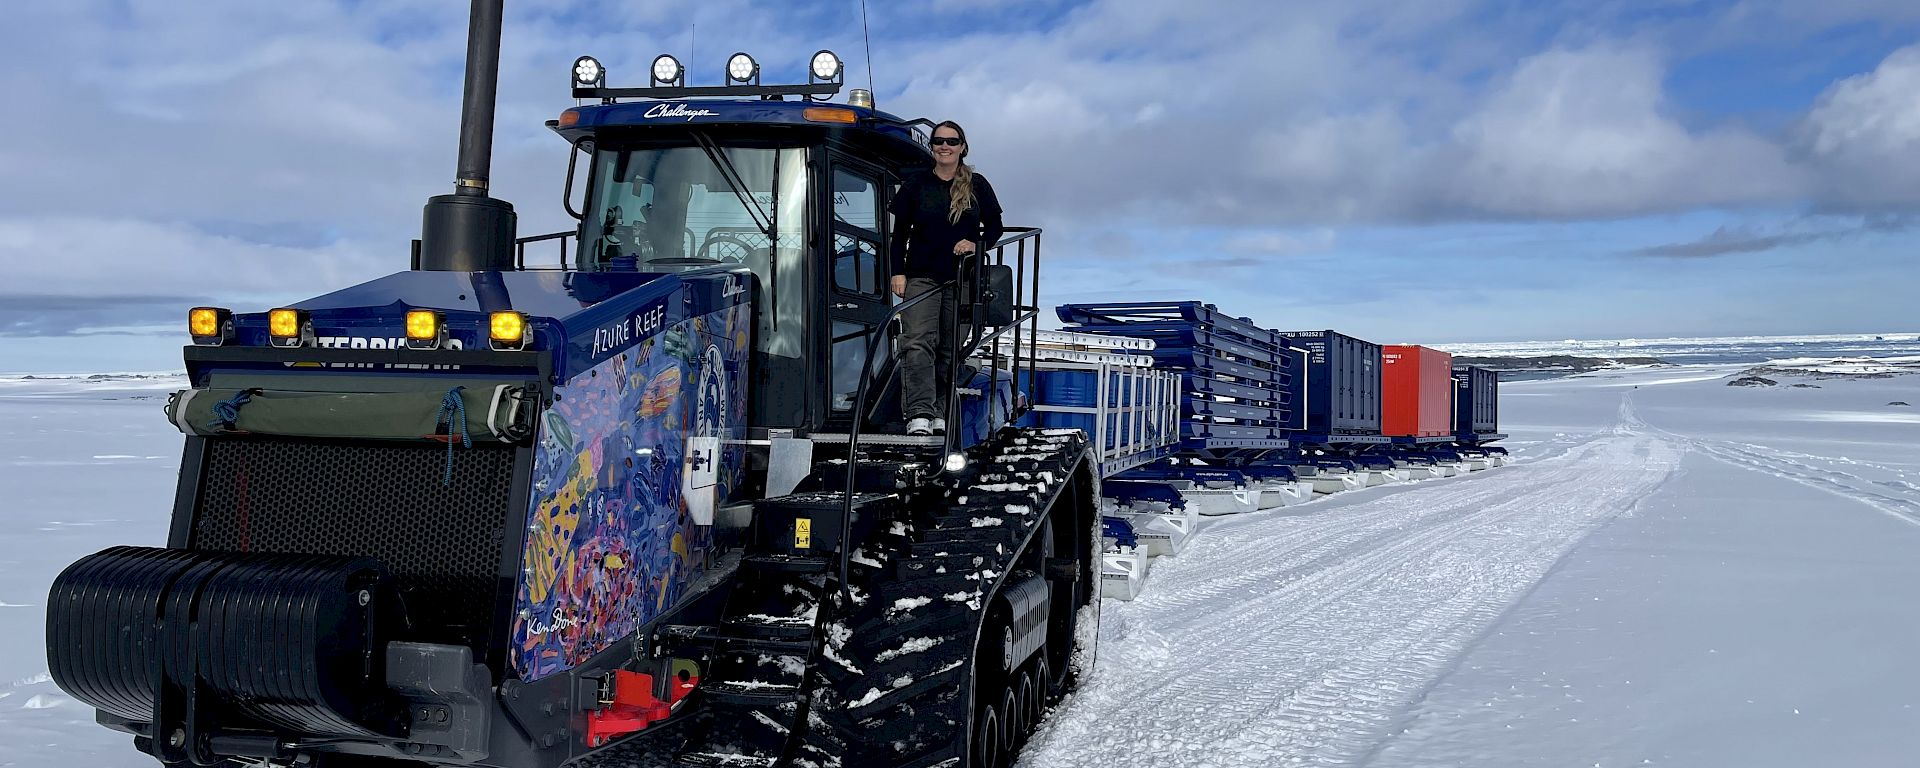 Expeditioner stands on a tractor on the ice, which is pulling several containers and sleds behind.